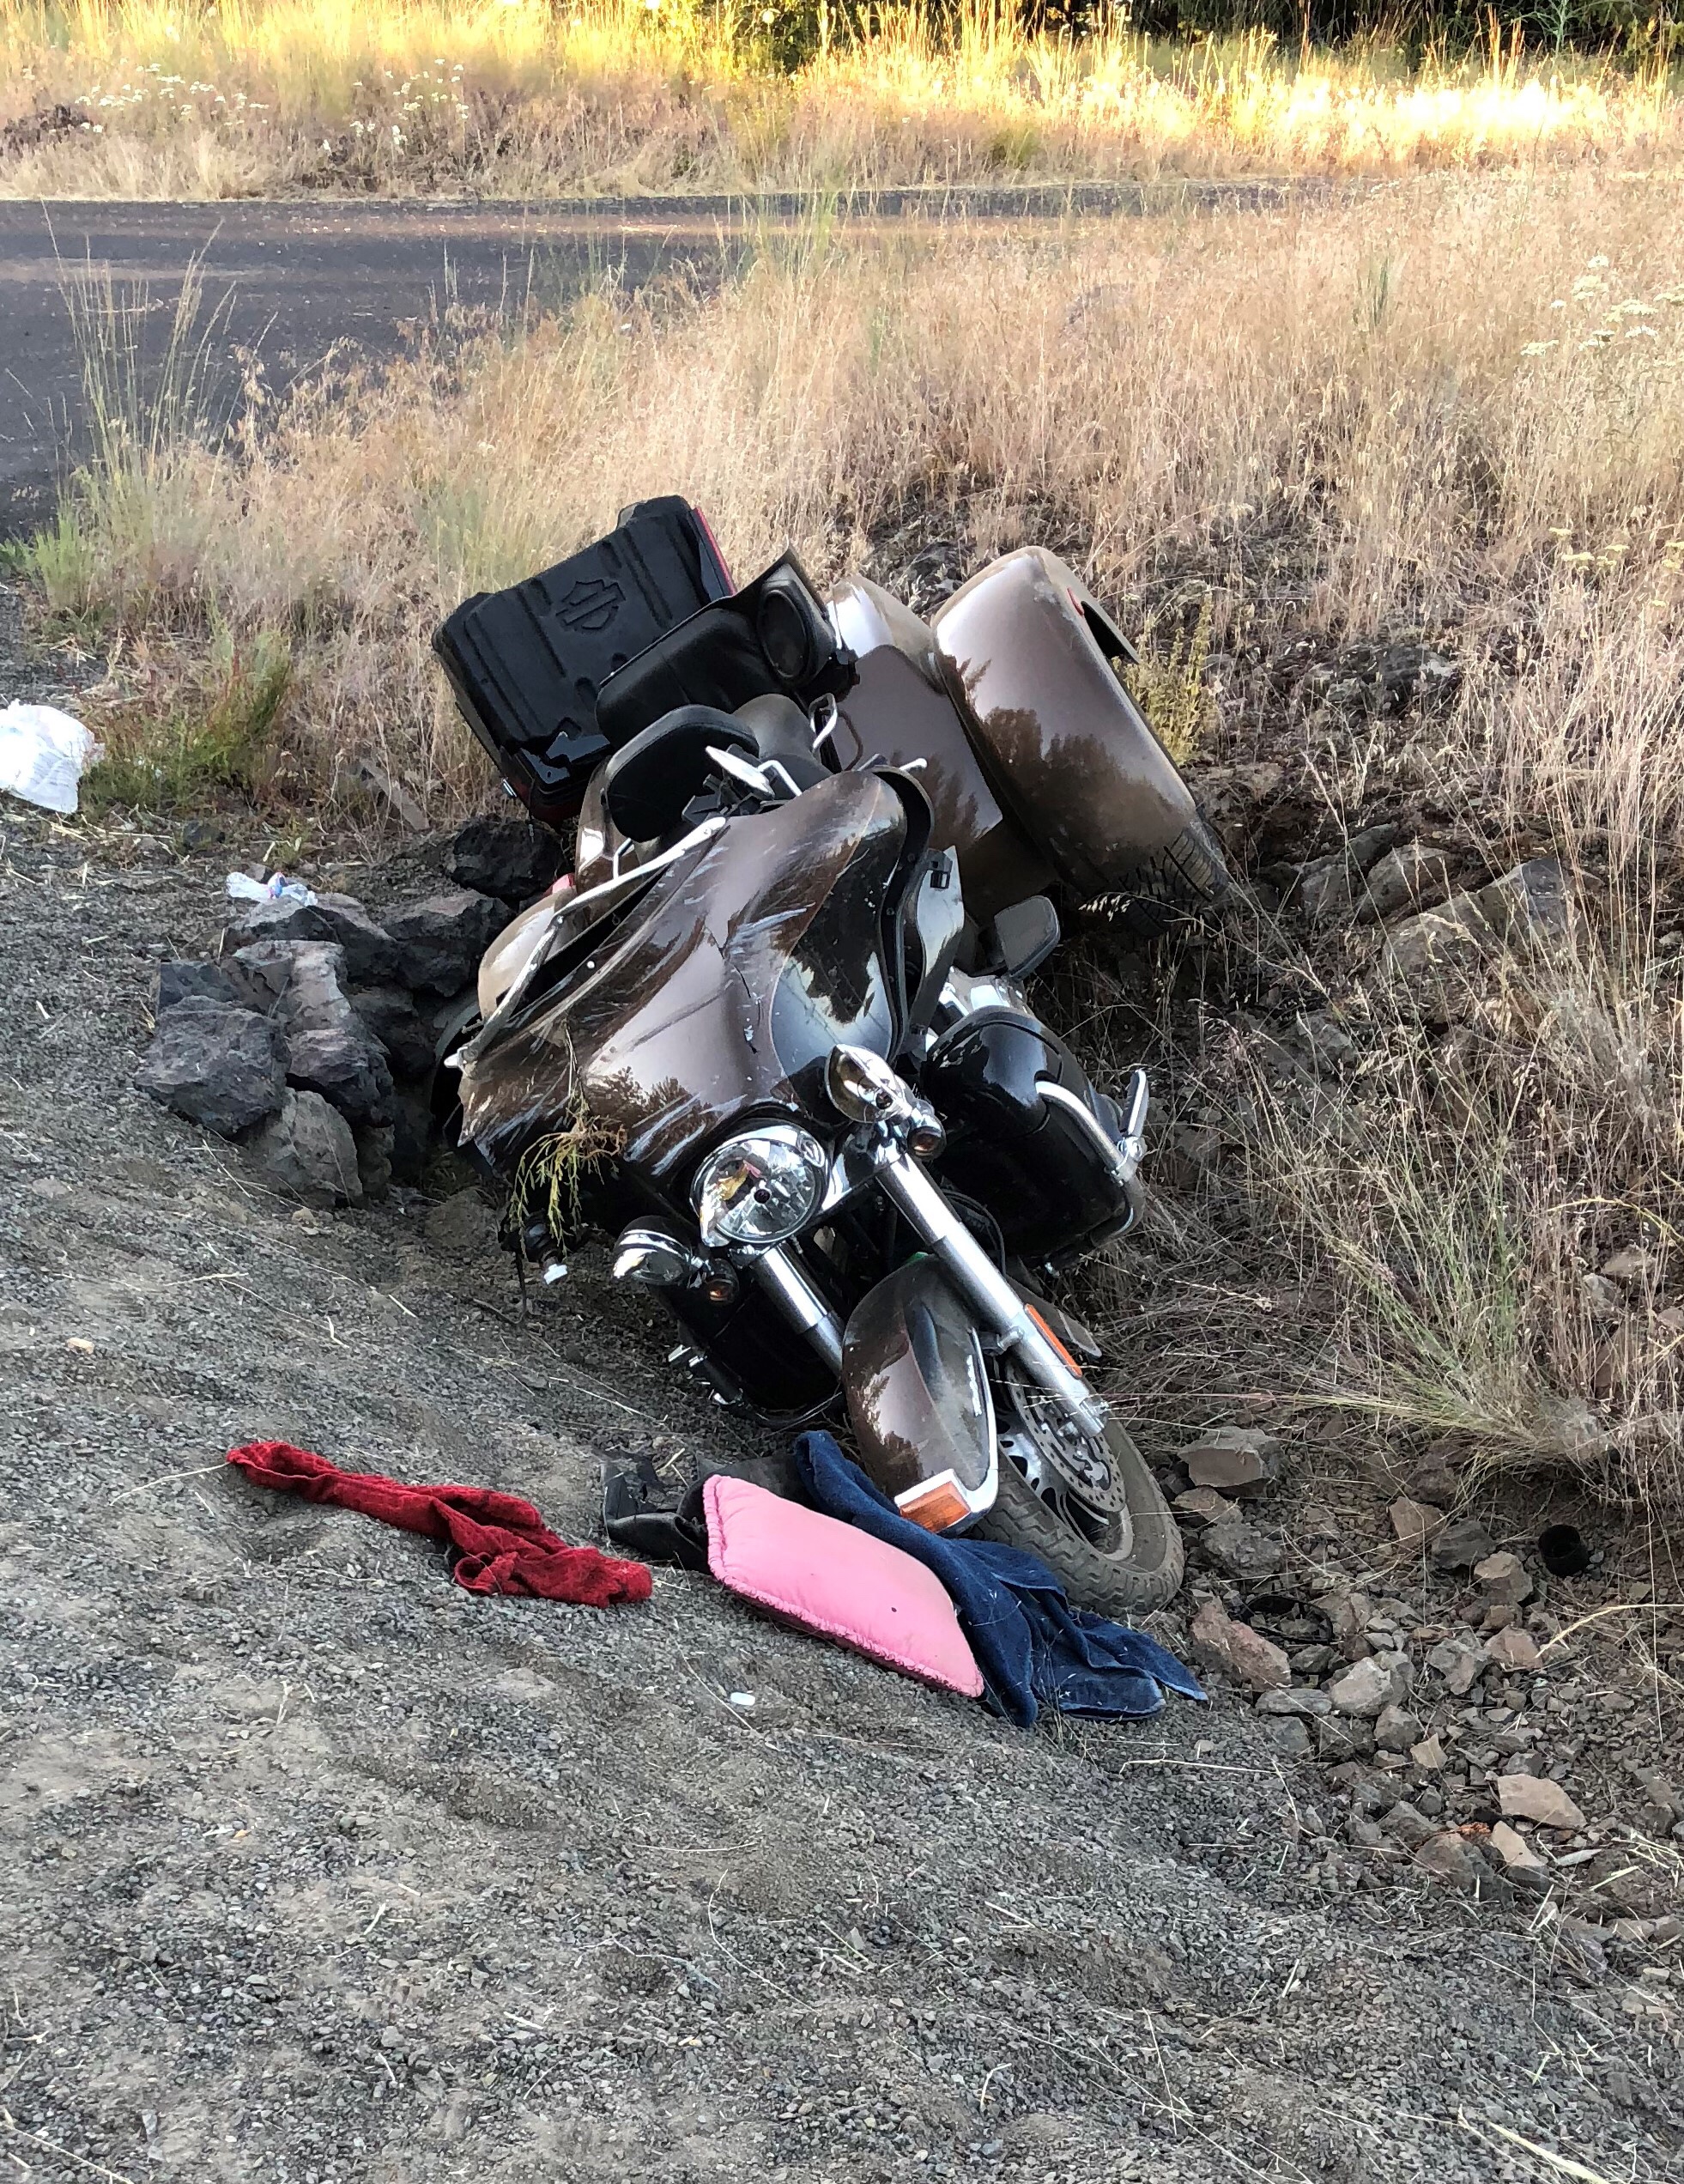 DOUBLE FATAL MOTORCYCLE CRASH AT THE JOSEPH CANYON VIEWPOINT NEAR